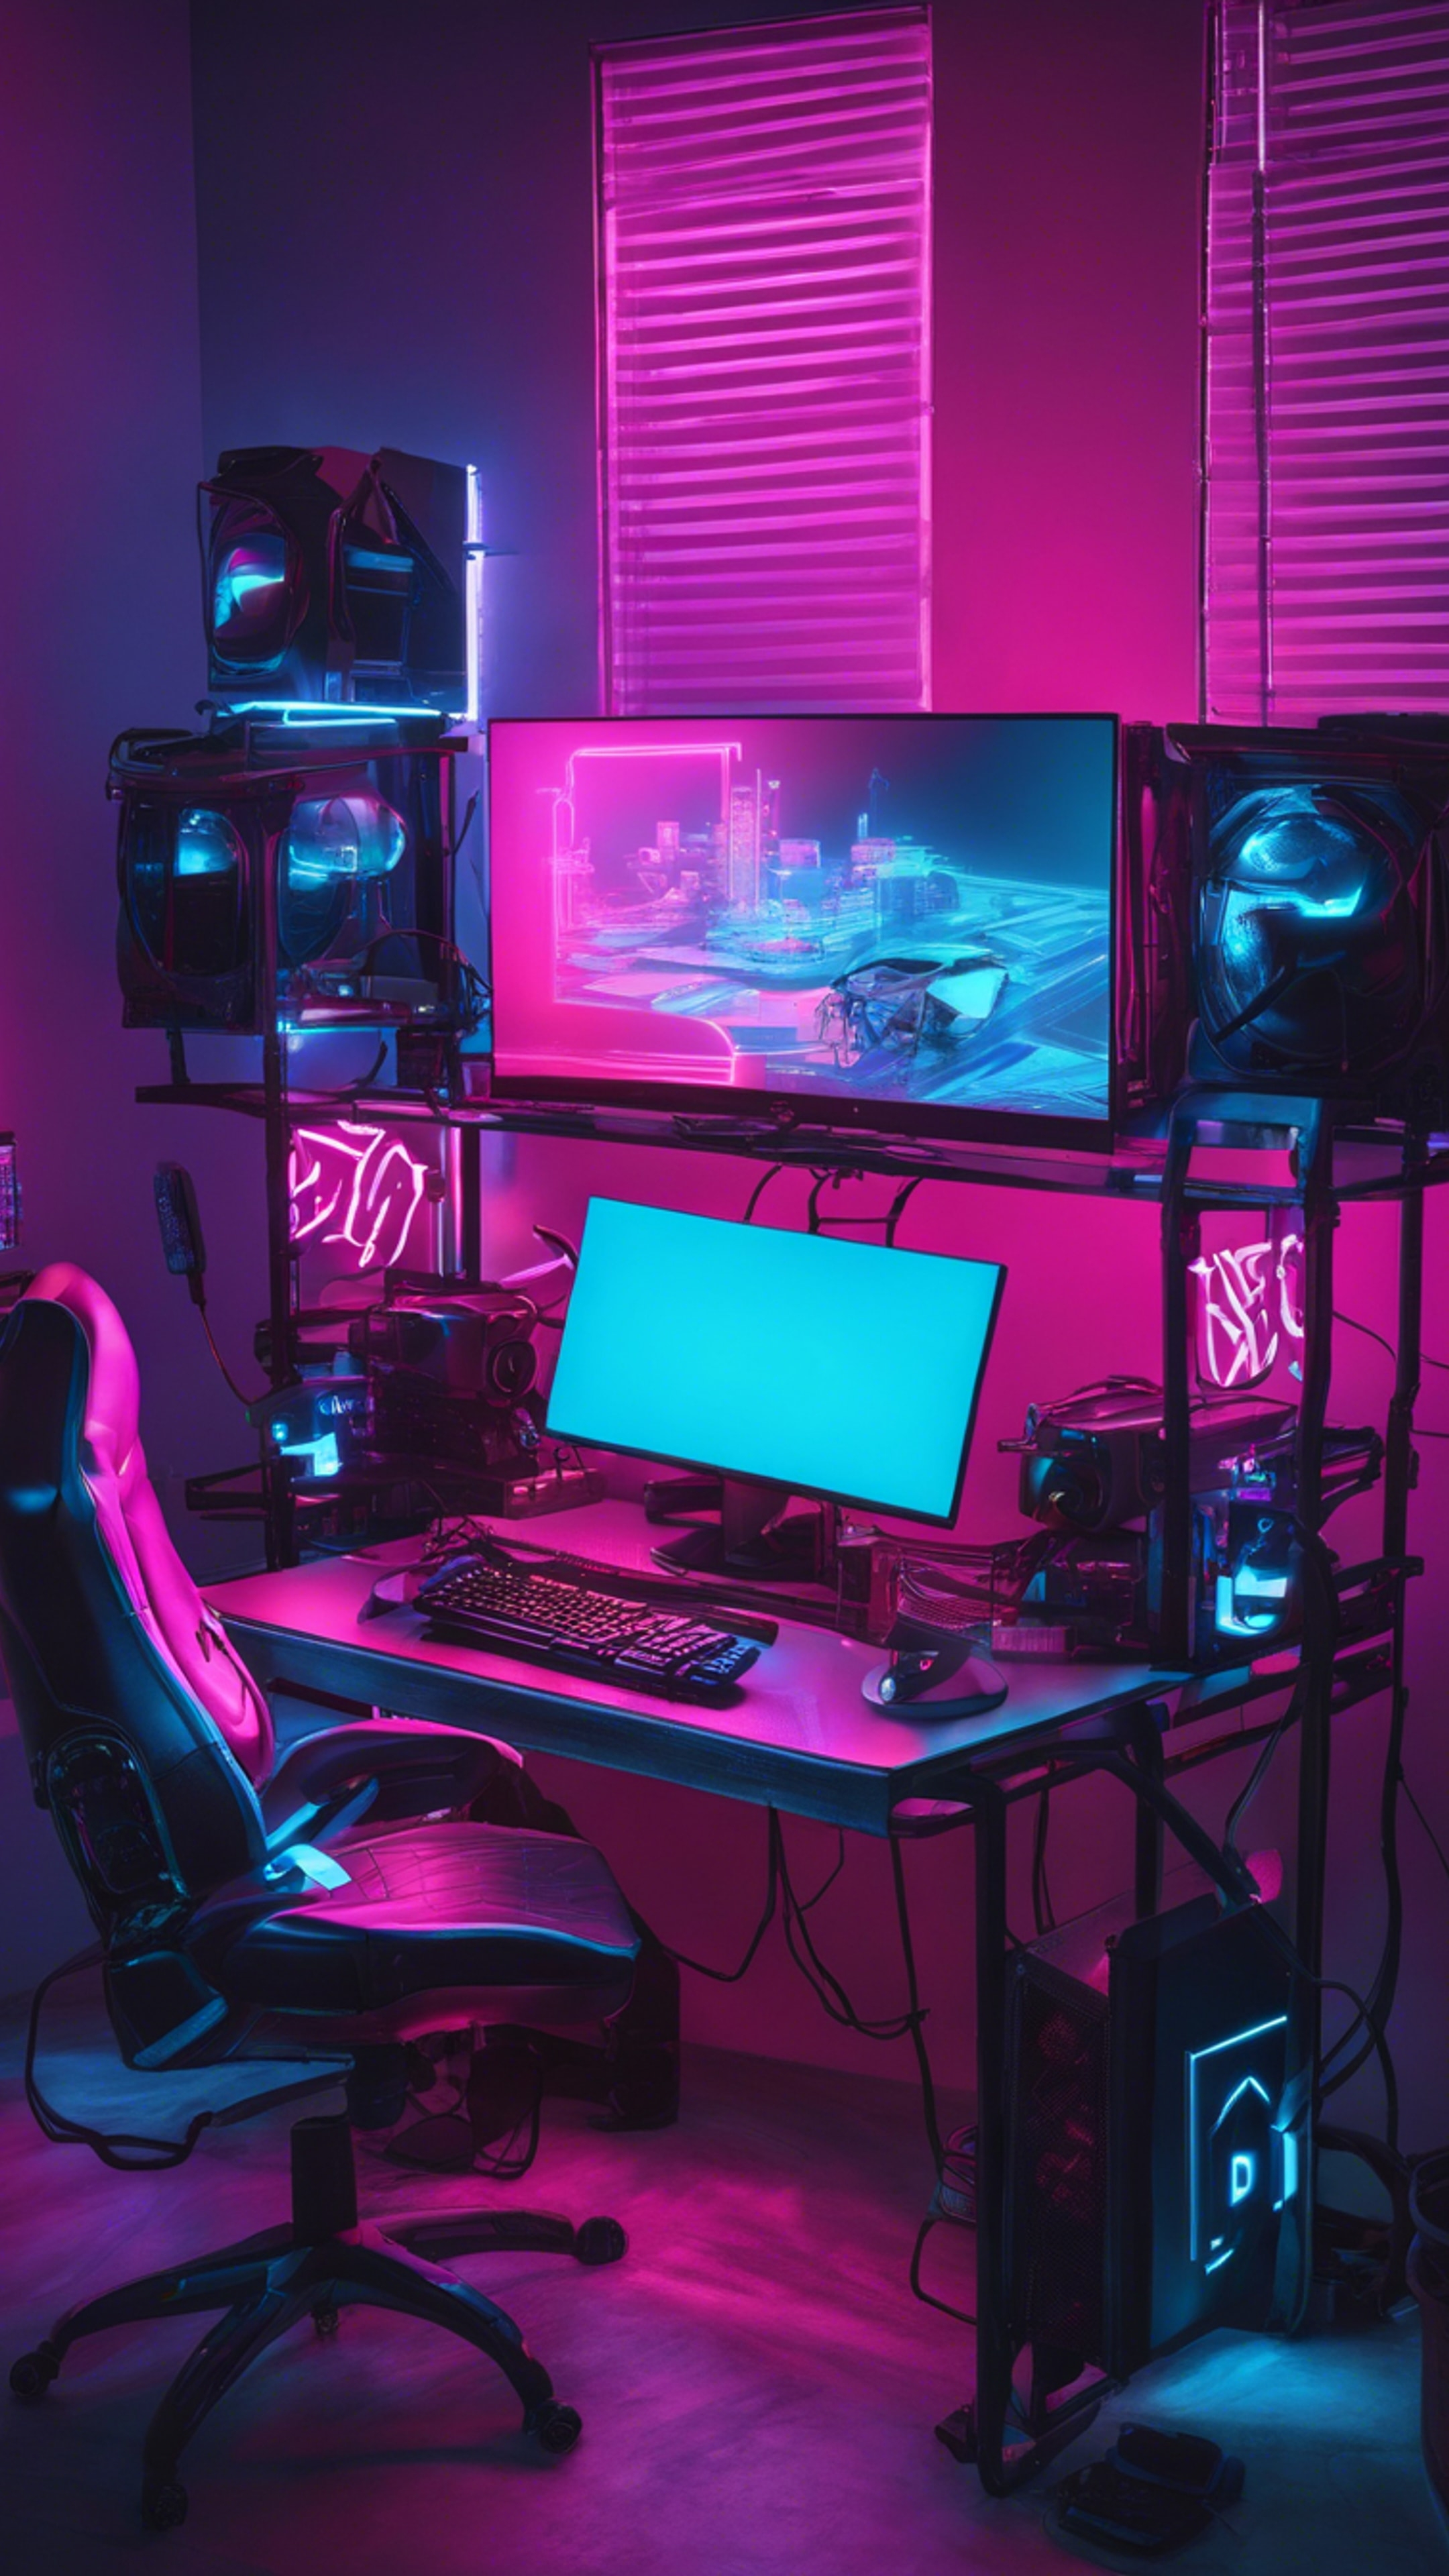 A neon blue gaming setup with a high-end PC, LED keyboard and a gaming monitor. Валлпапер[173ea11d79a5456c932c]